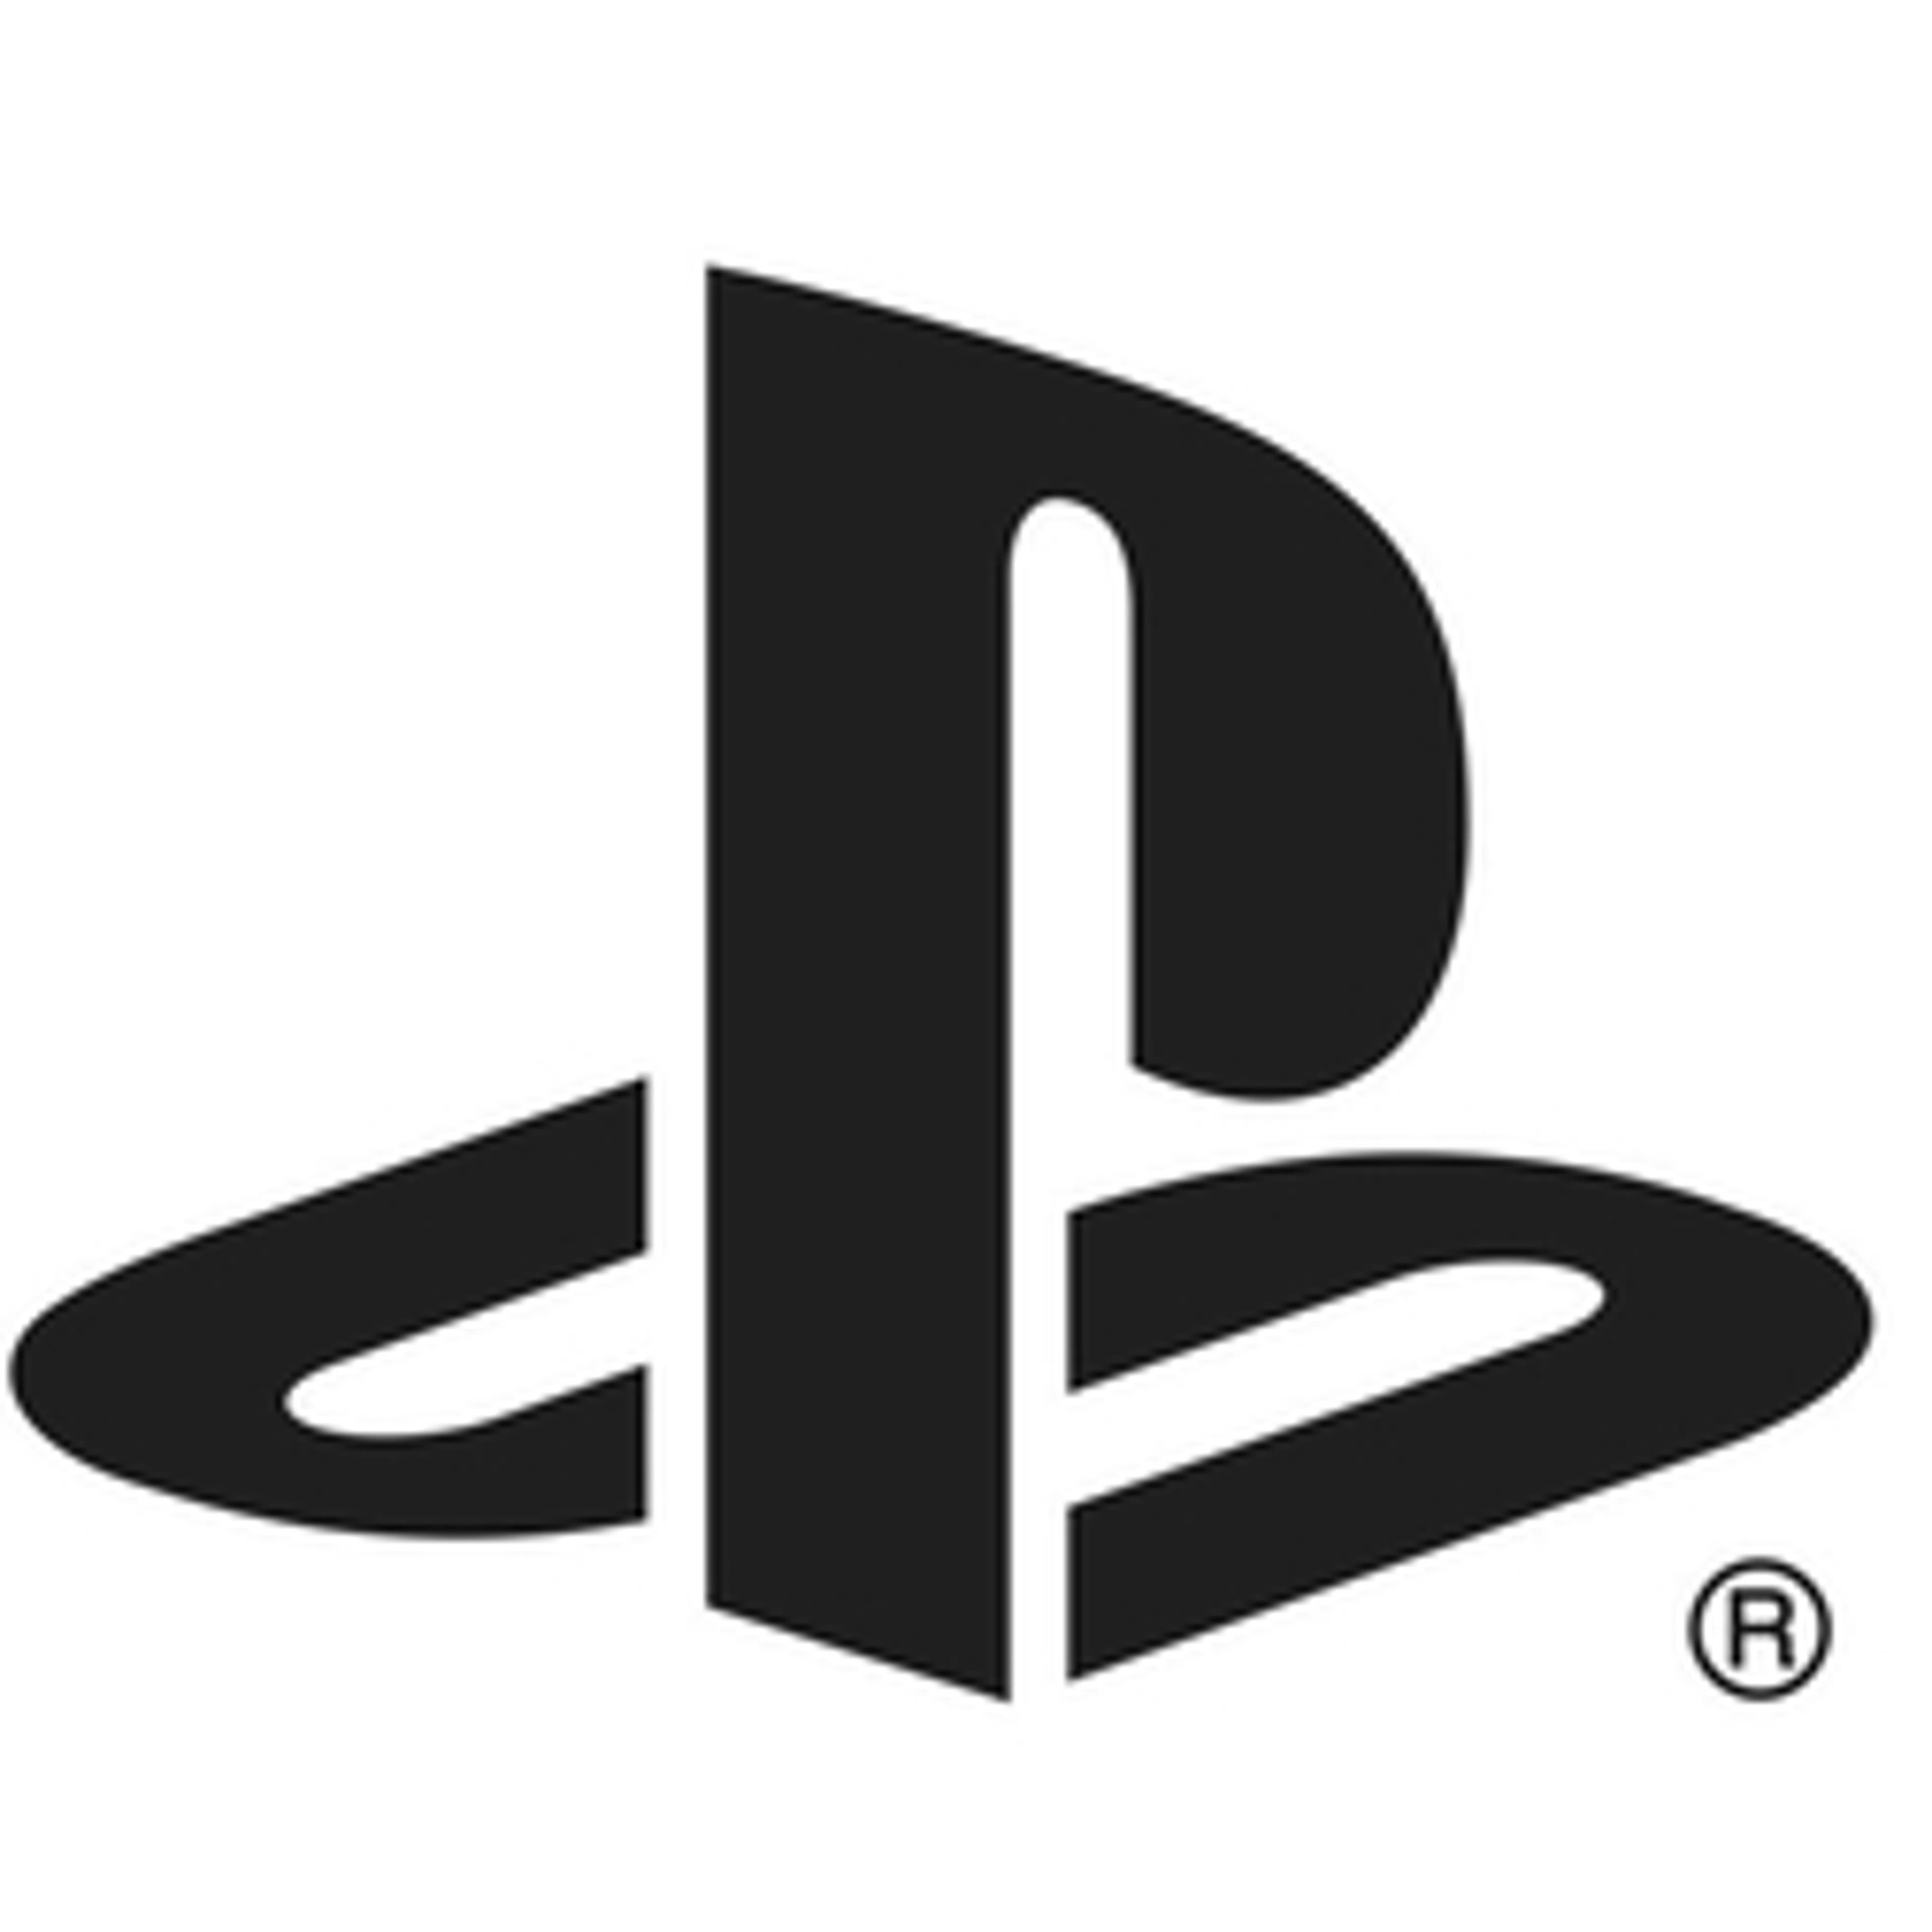  PlayStation Store 